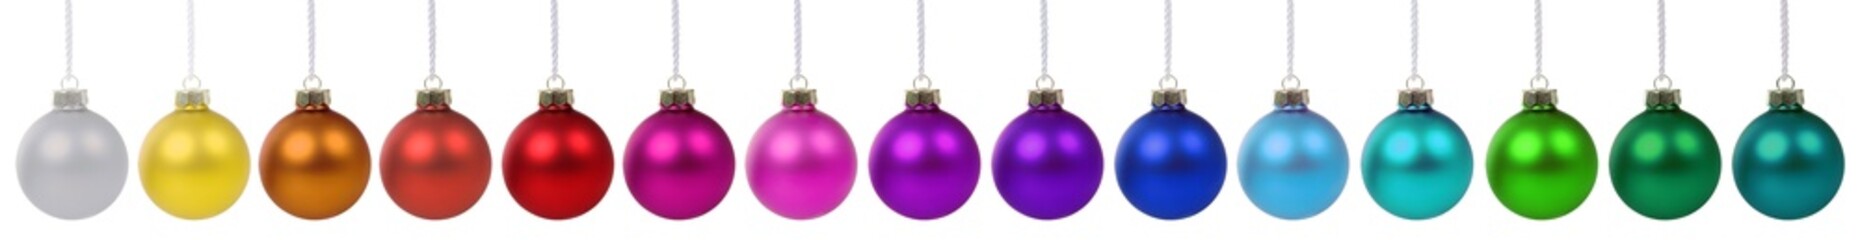 Christmas decoration balls baubles colorful banner in a row isolated on a white background